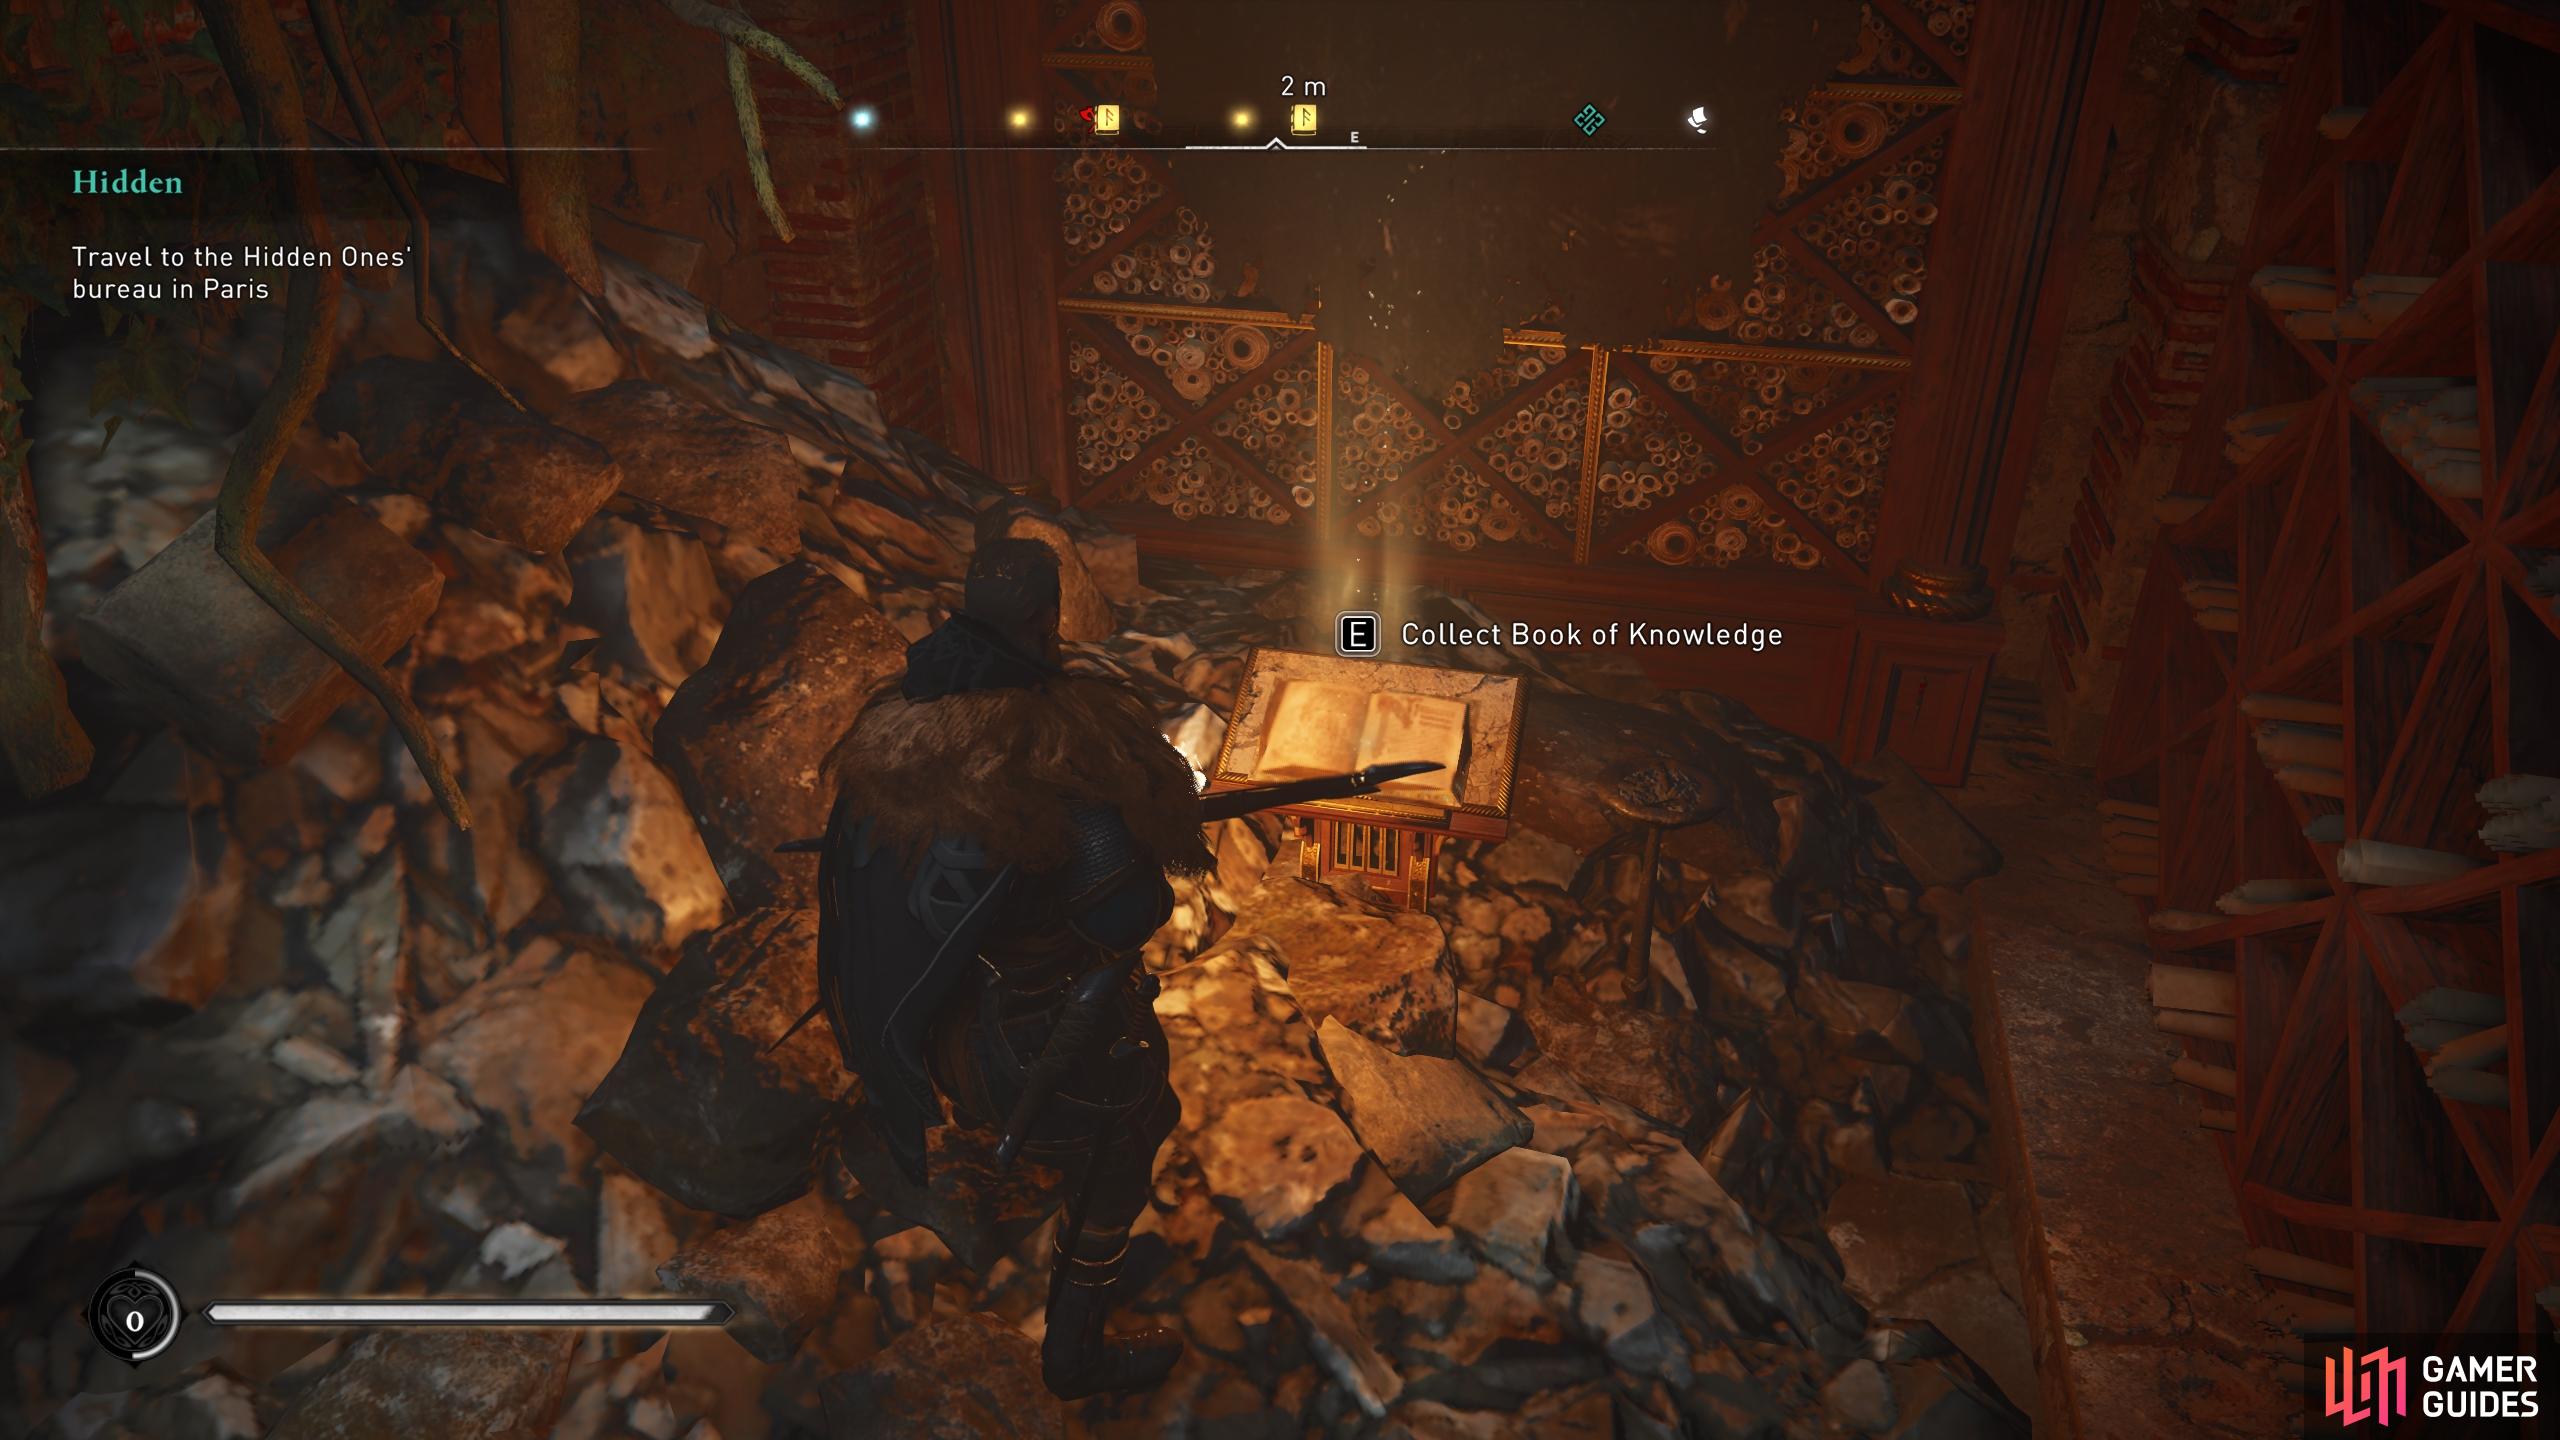 You'll find the Book of Knowledge behind the barricade beyond the northern wall.